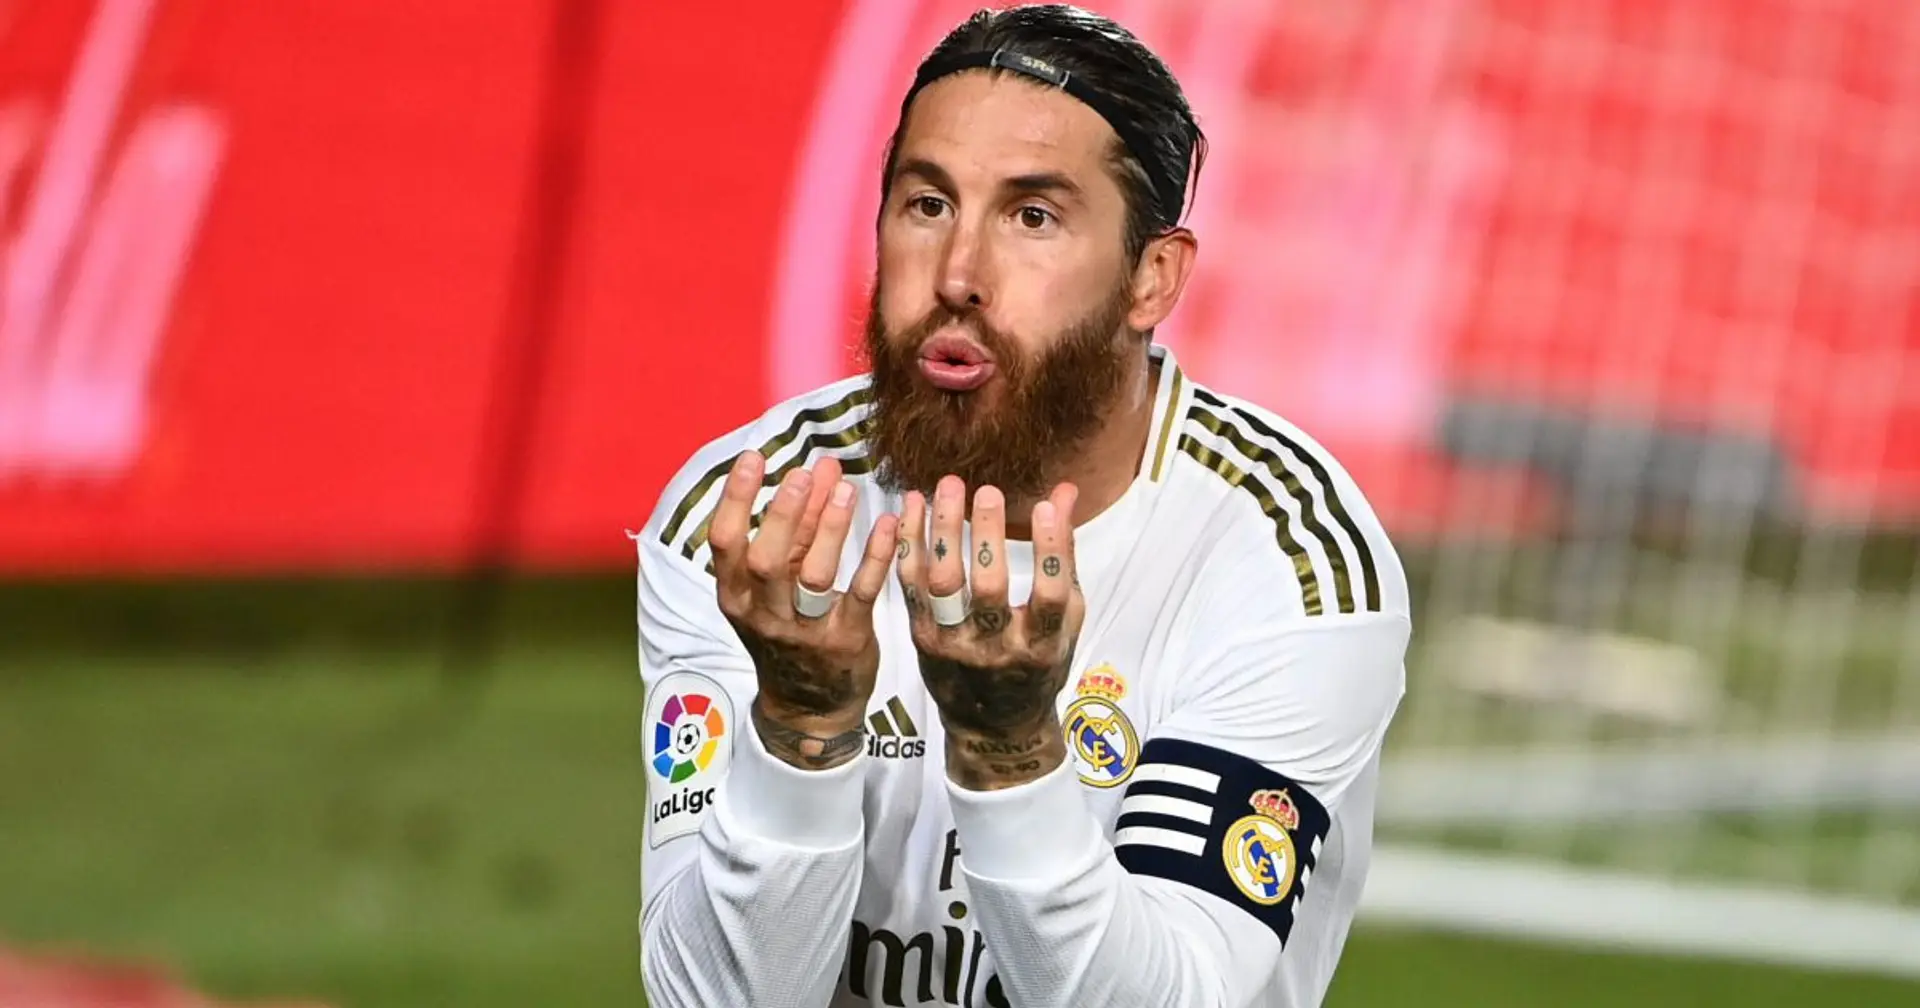 Madrid reportedly identify 2 possible long-term replacements for Ramos